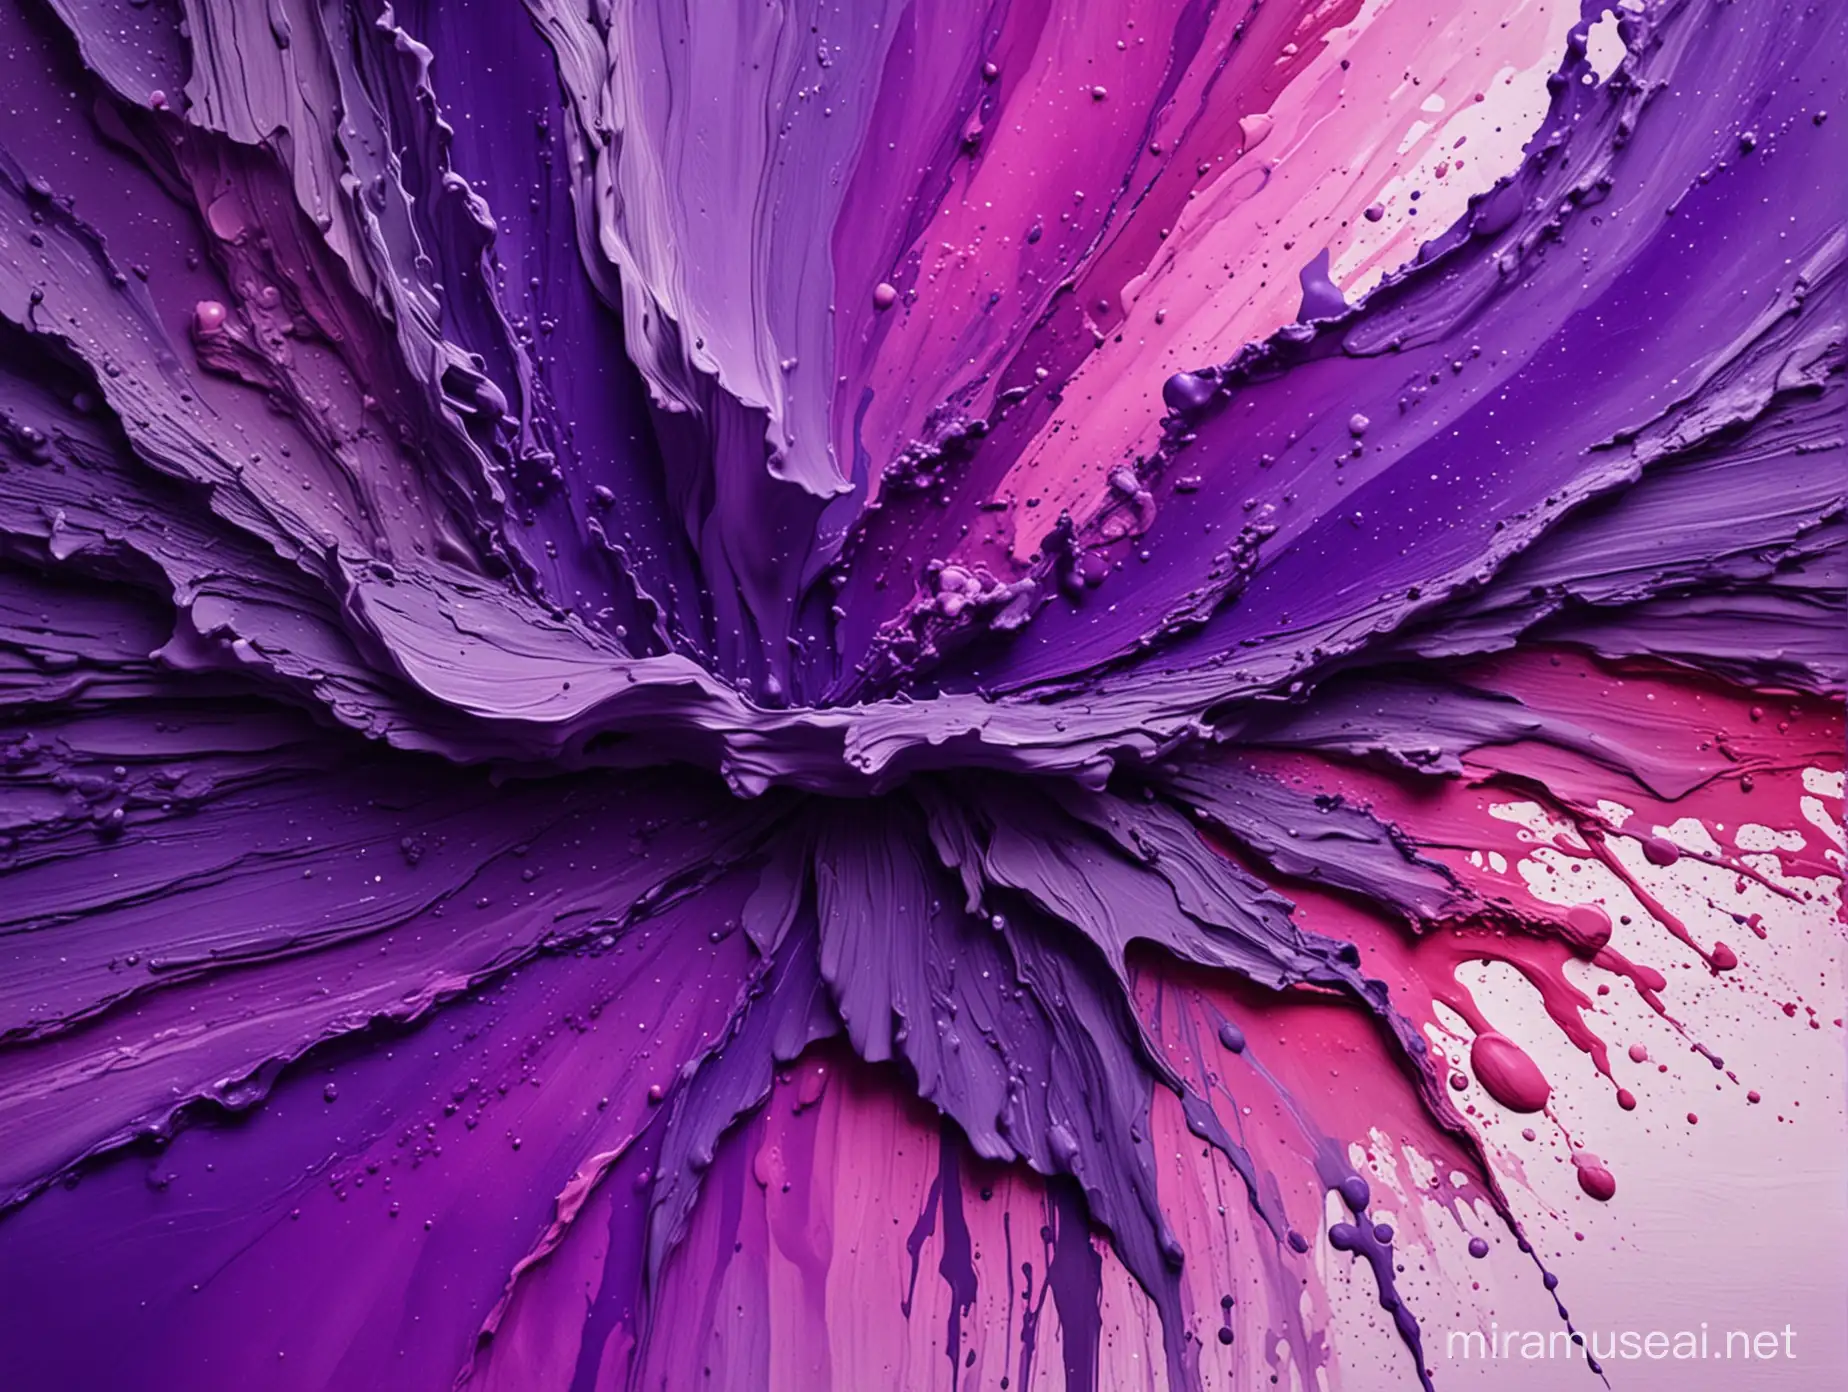 Vibrant Purple Abstract Art Fluid Painting with Color Splash and Paints